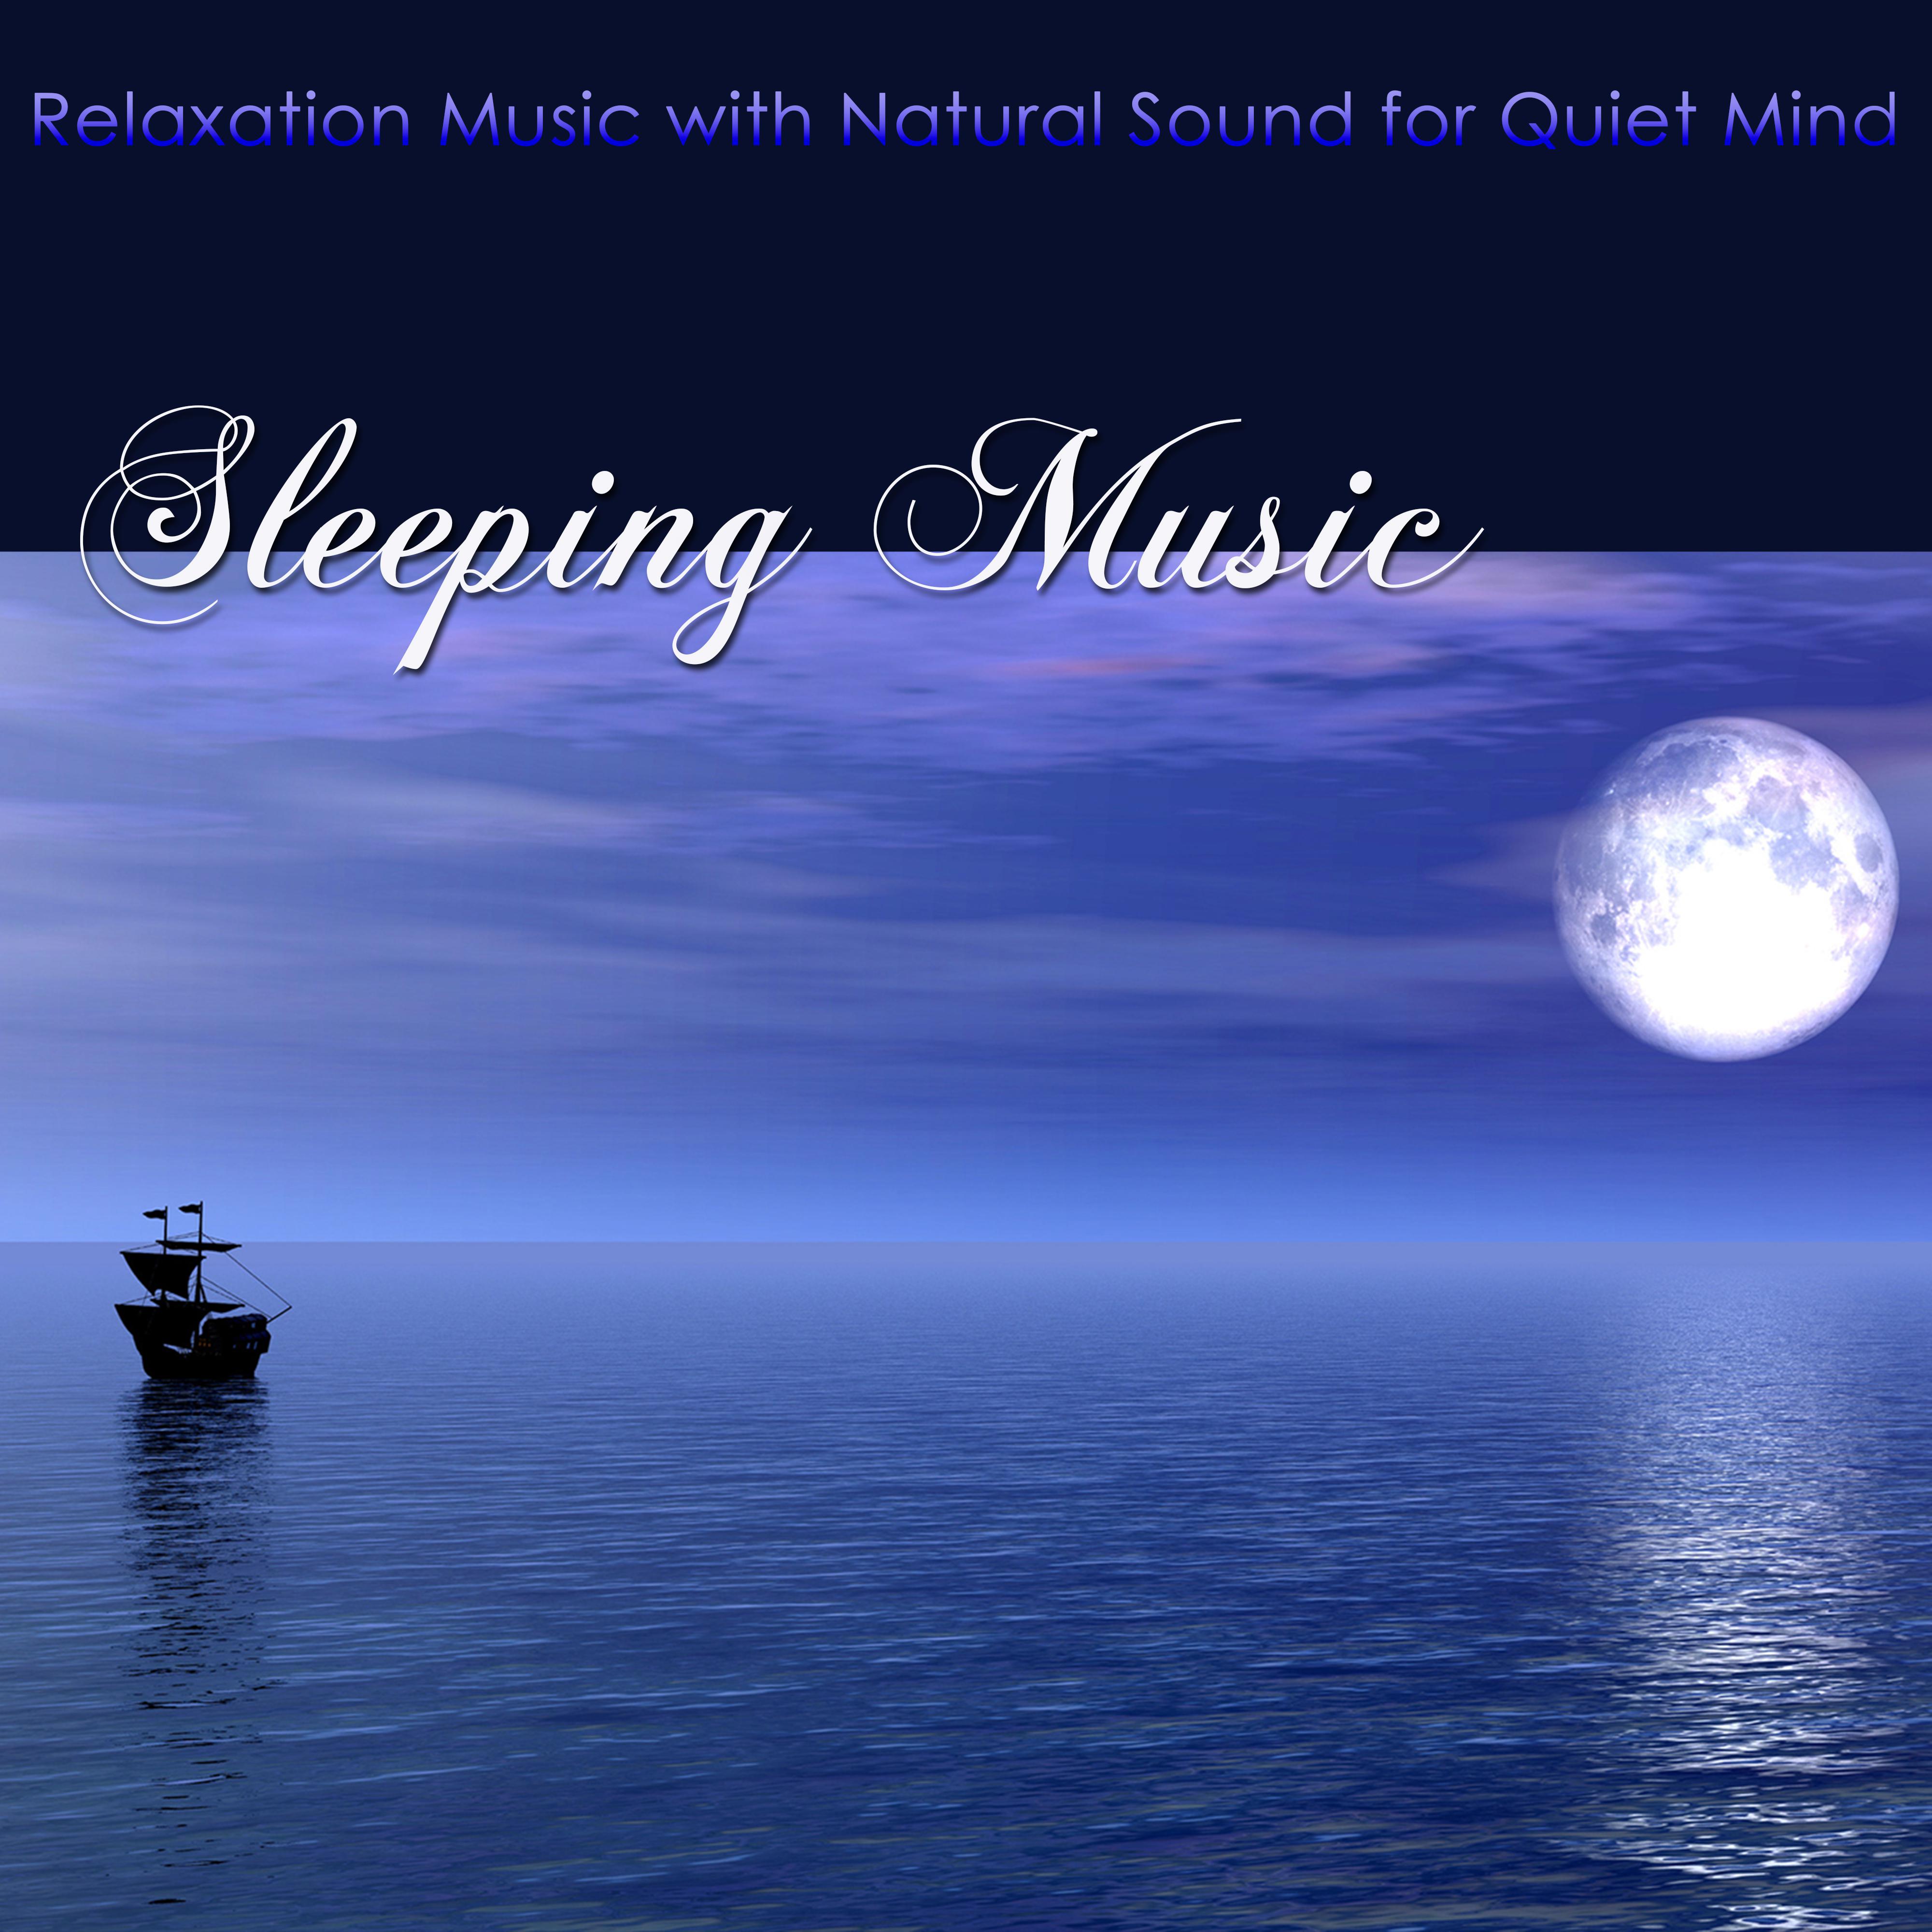 Sleeping Music  Relaxation Music with Natural Sound for Quiet Mind, Deep Relaxation, Peaceful Sleep  Help Sleeping if you suffer from Sleeping Disorders and Insomnia